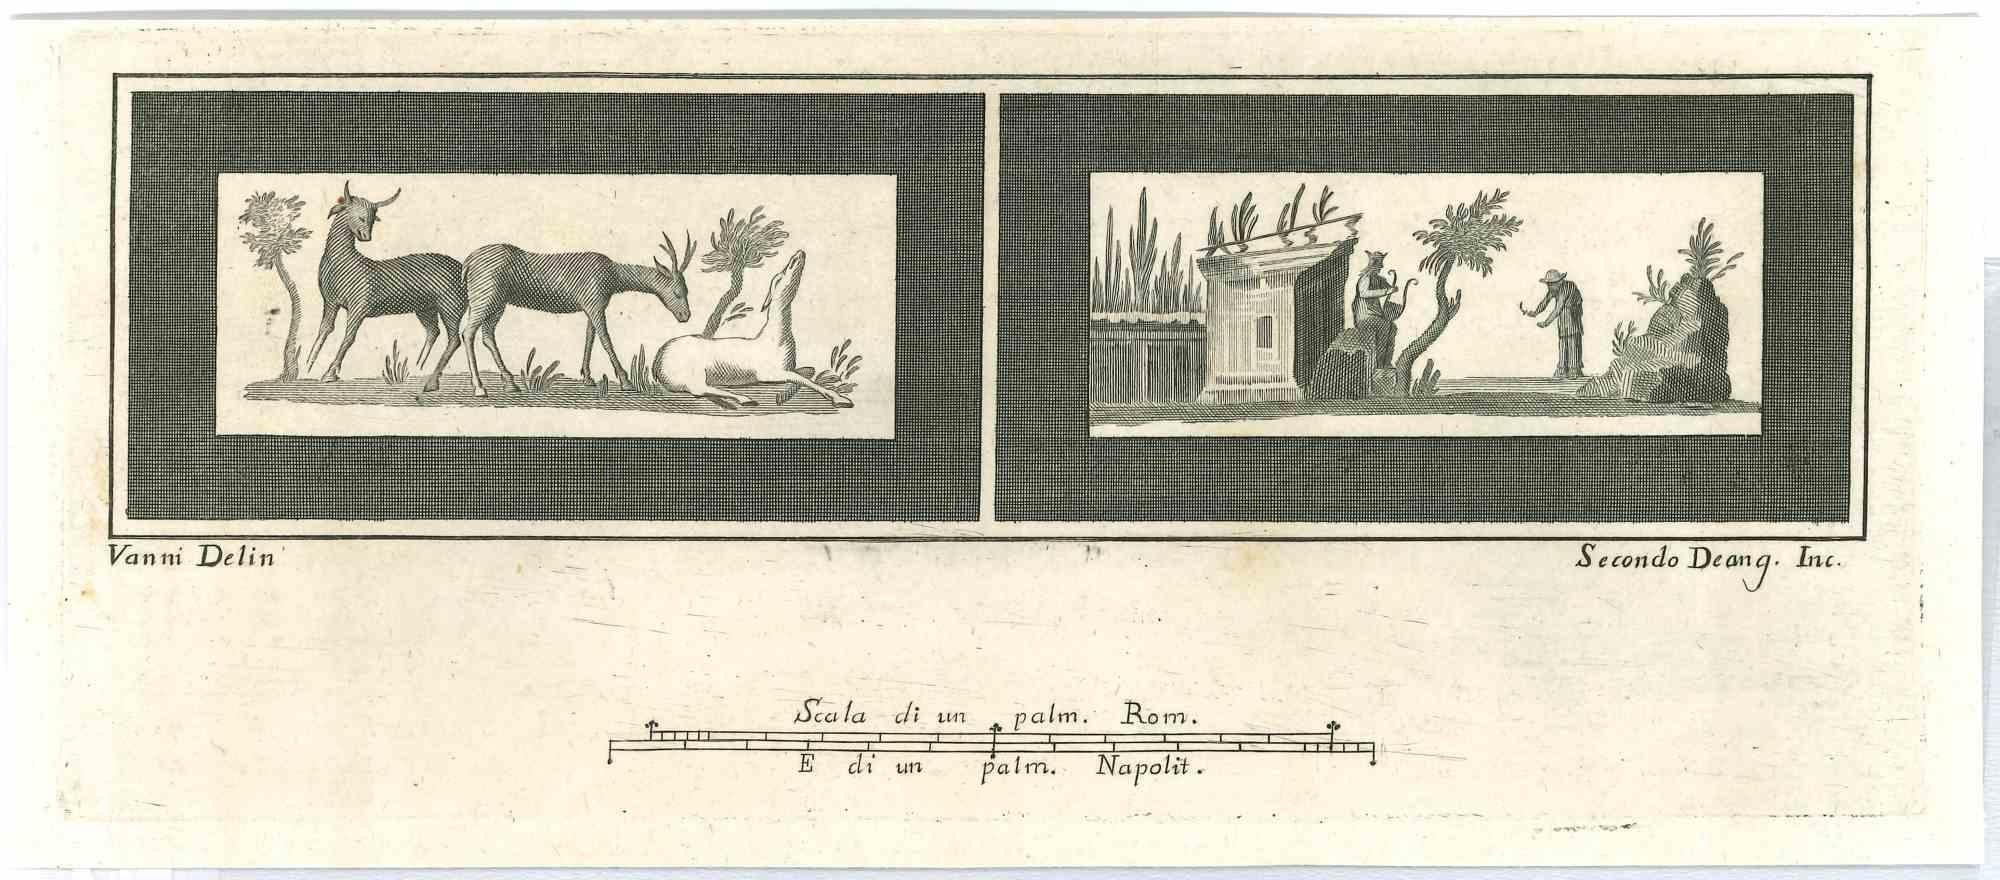 Ancient Roman Frescoes, from the series "Antiquities of Herculaneum", is an original etching on paper realized from a design by Nicolò Vanni in the 18th century.

Signed on the plate.

Good conditions.

The etching belongs to the print suite